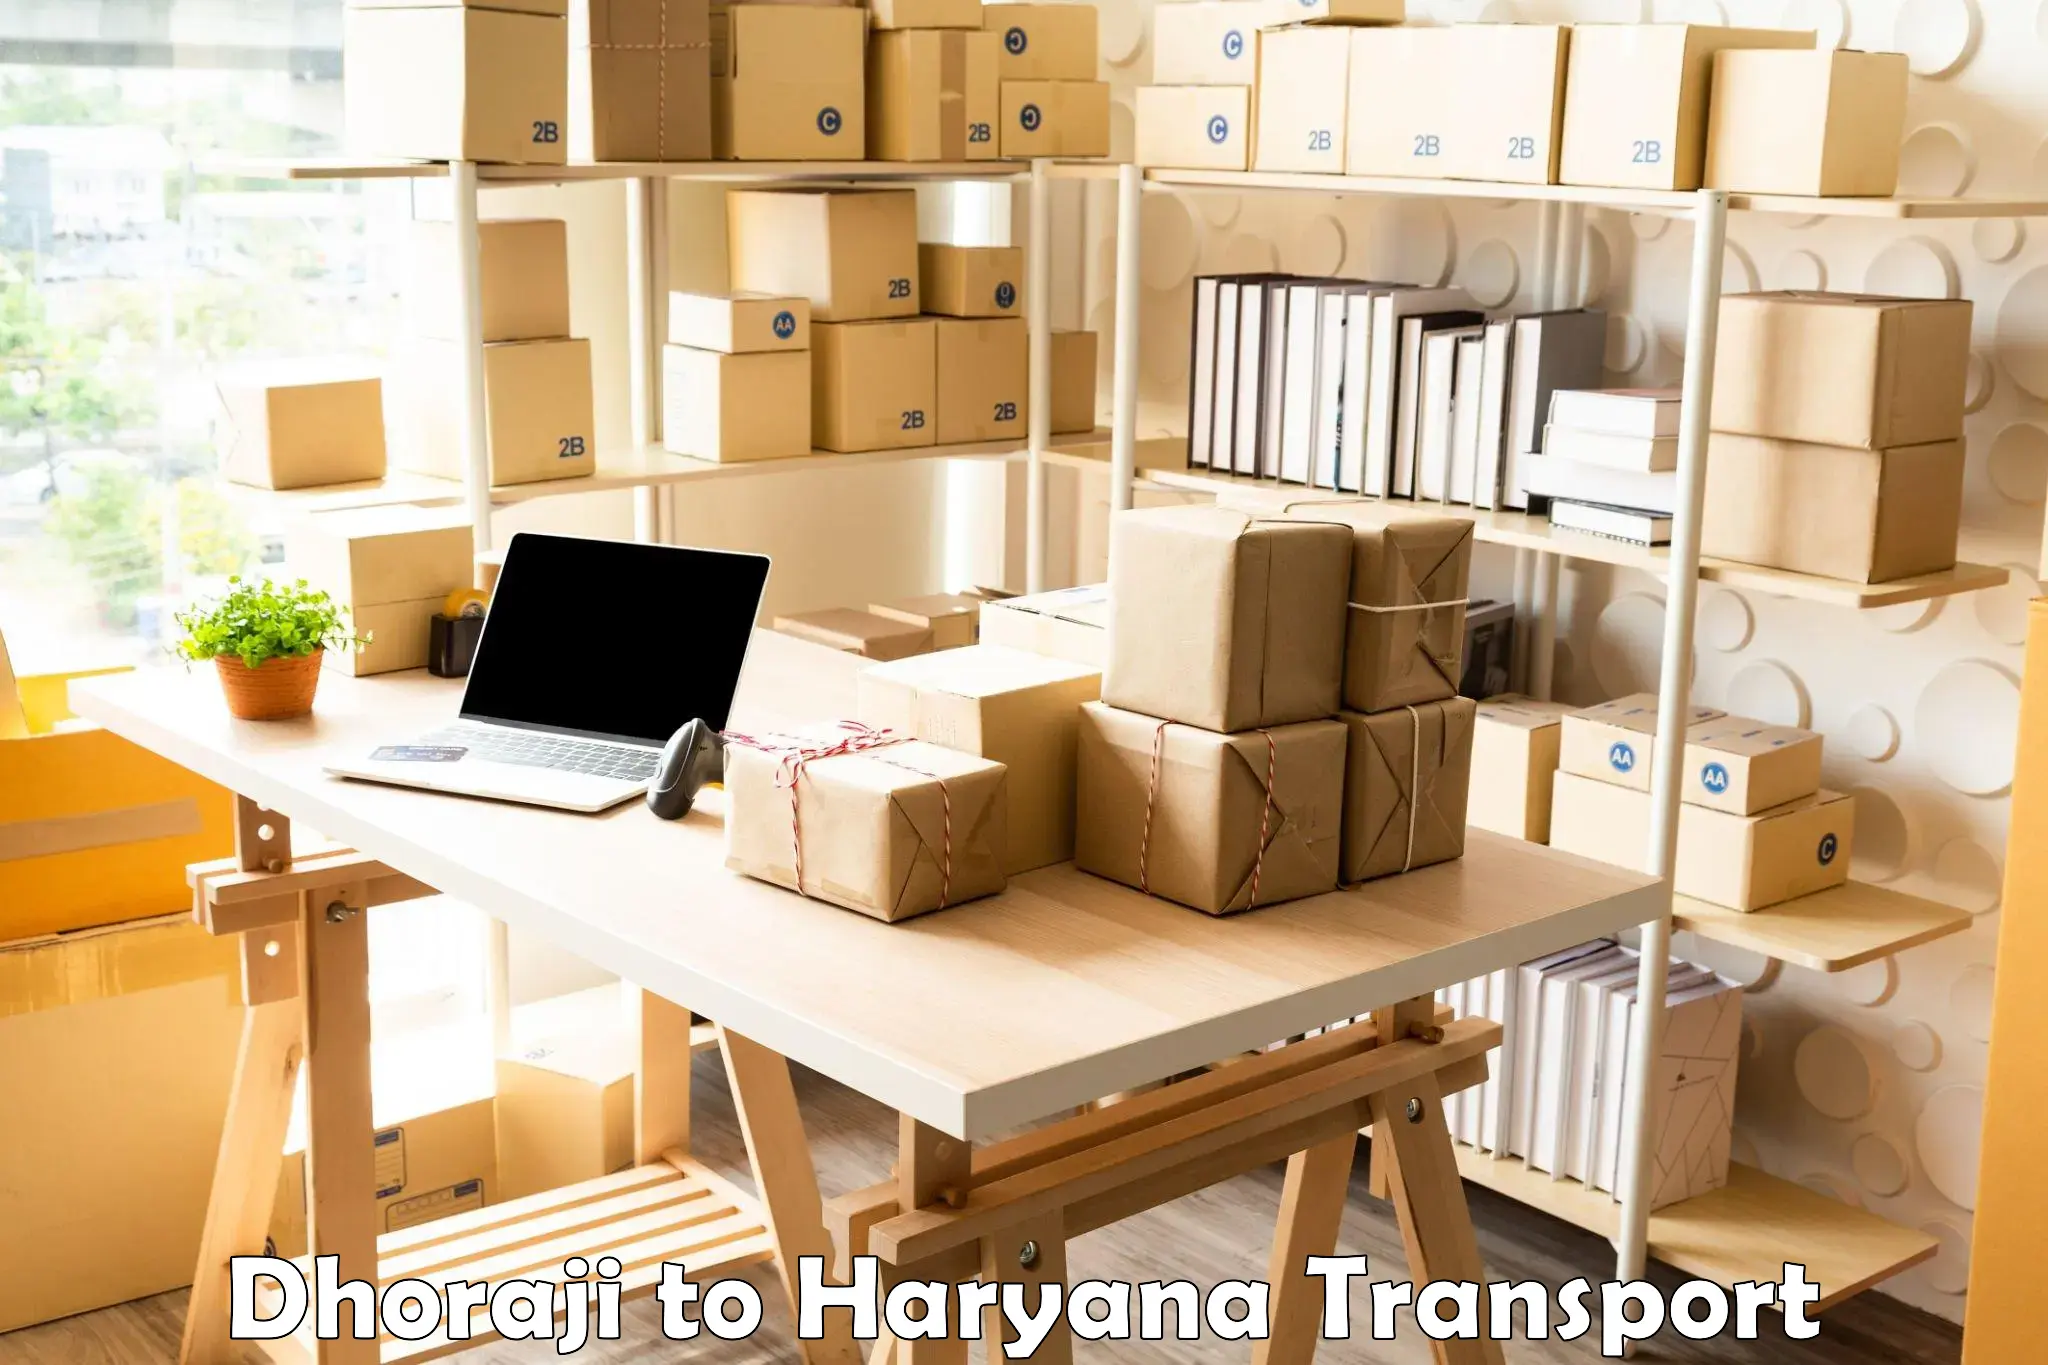 Air freight transport services Dhoraji to Chaudhary Charan Singh Haryana Agricultural University Hisar